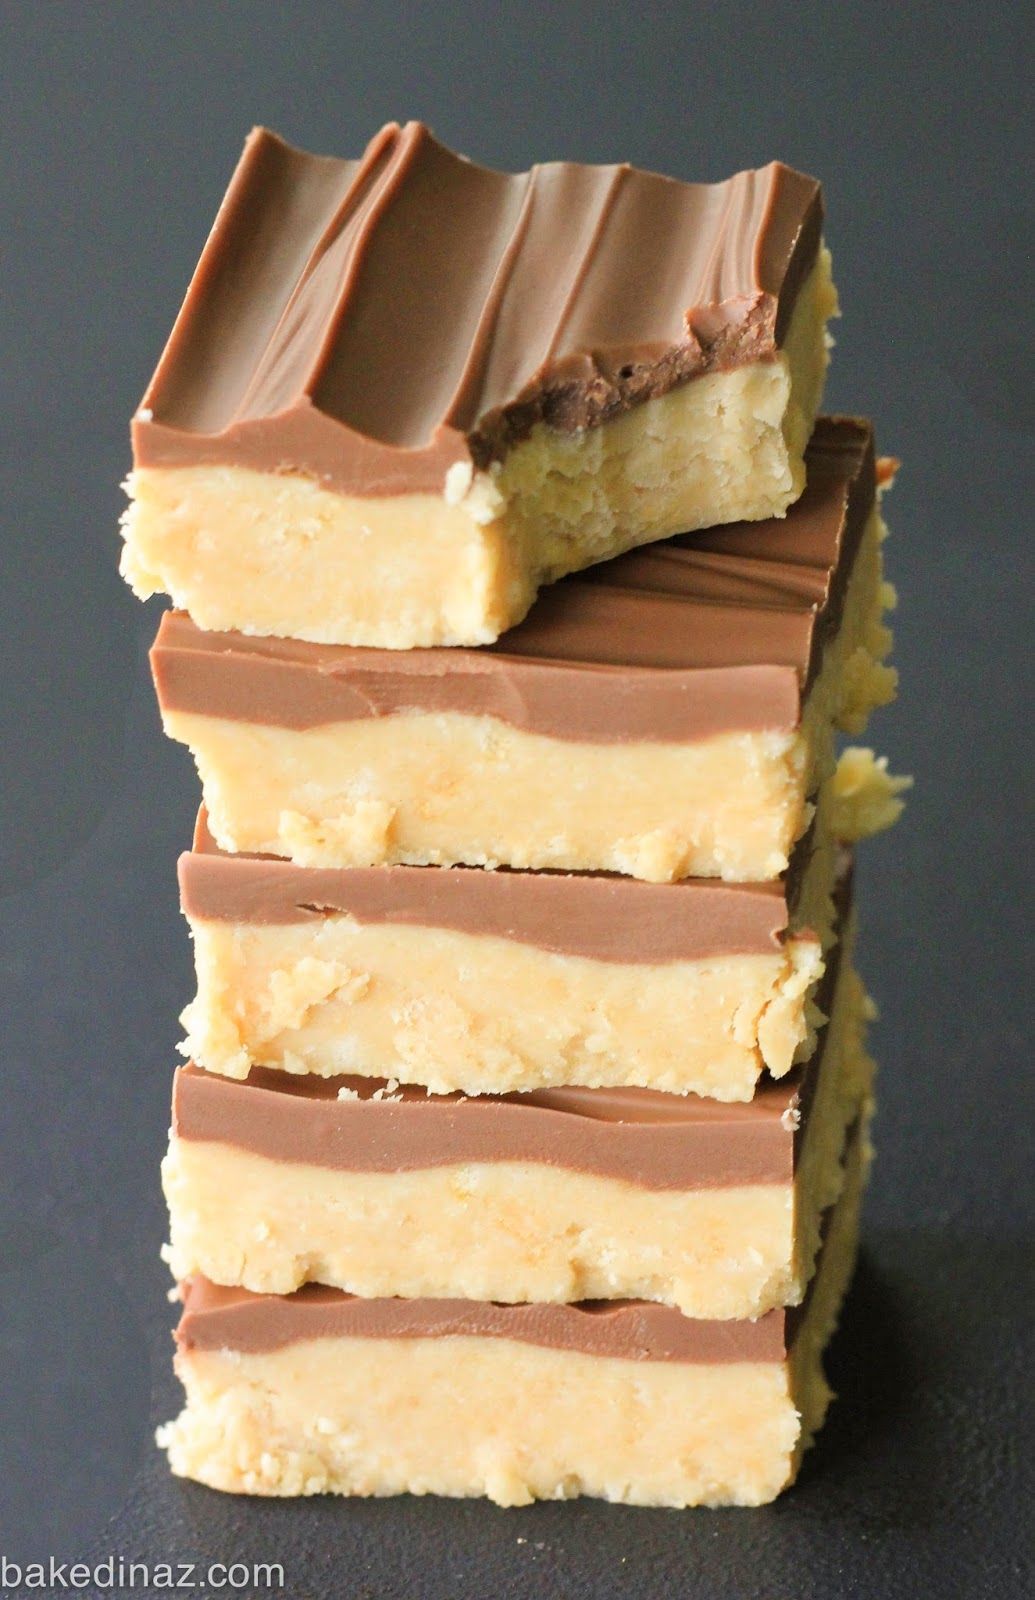 Creamy Peanut Butter Bars – these bars are quick to make and better than store bought. Melt in your mouth good!